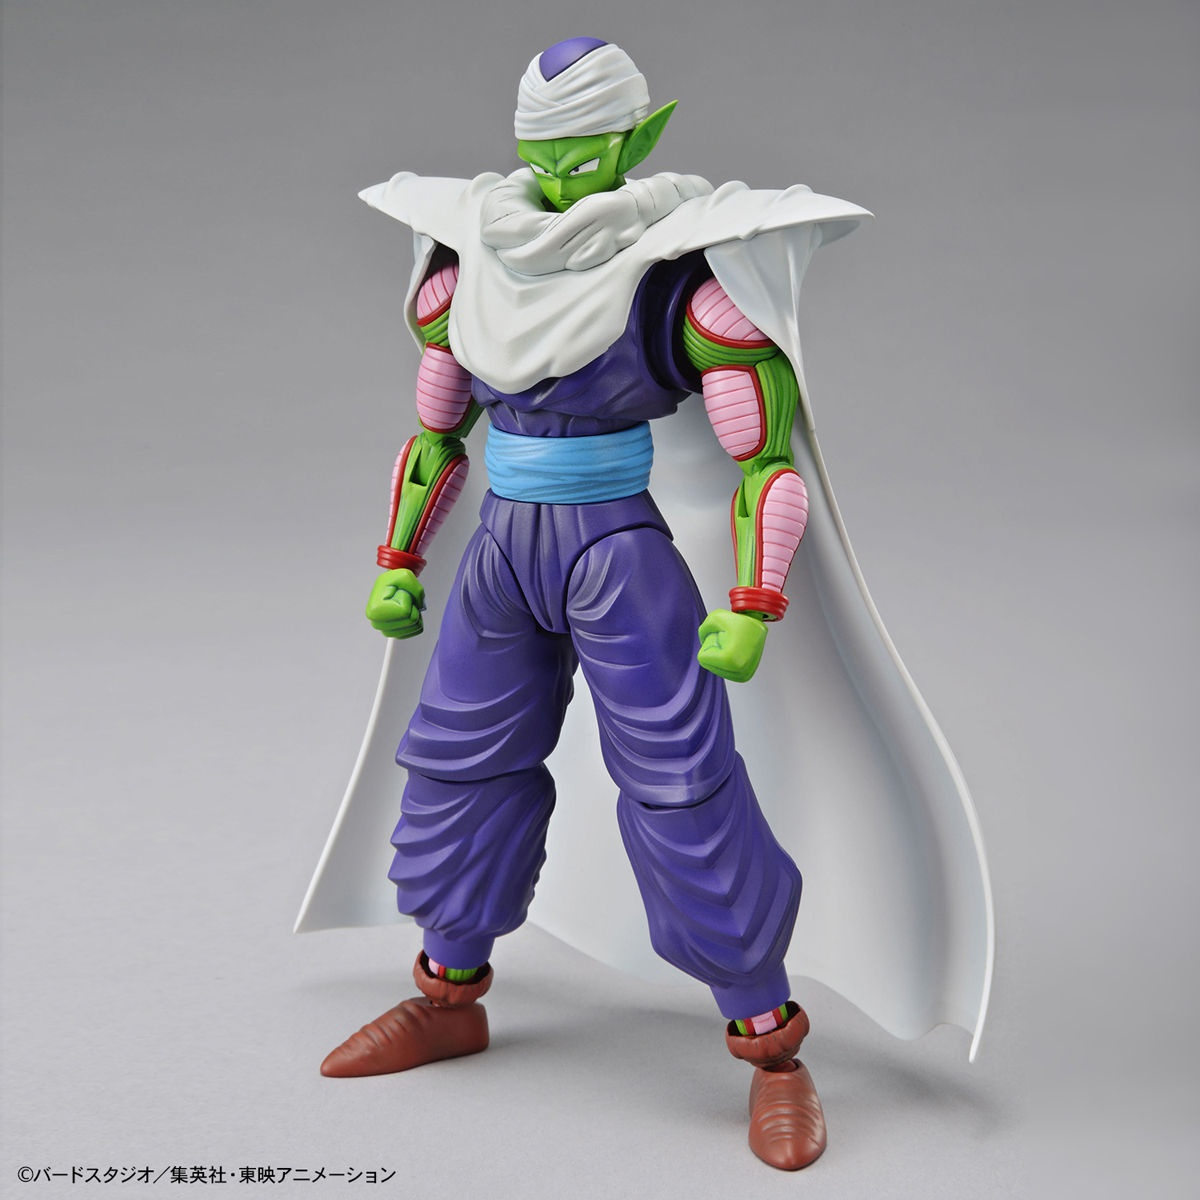 FIGURE-RISE STANDARD PICCOLO RENEWAL PACKAGE VER